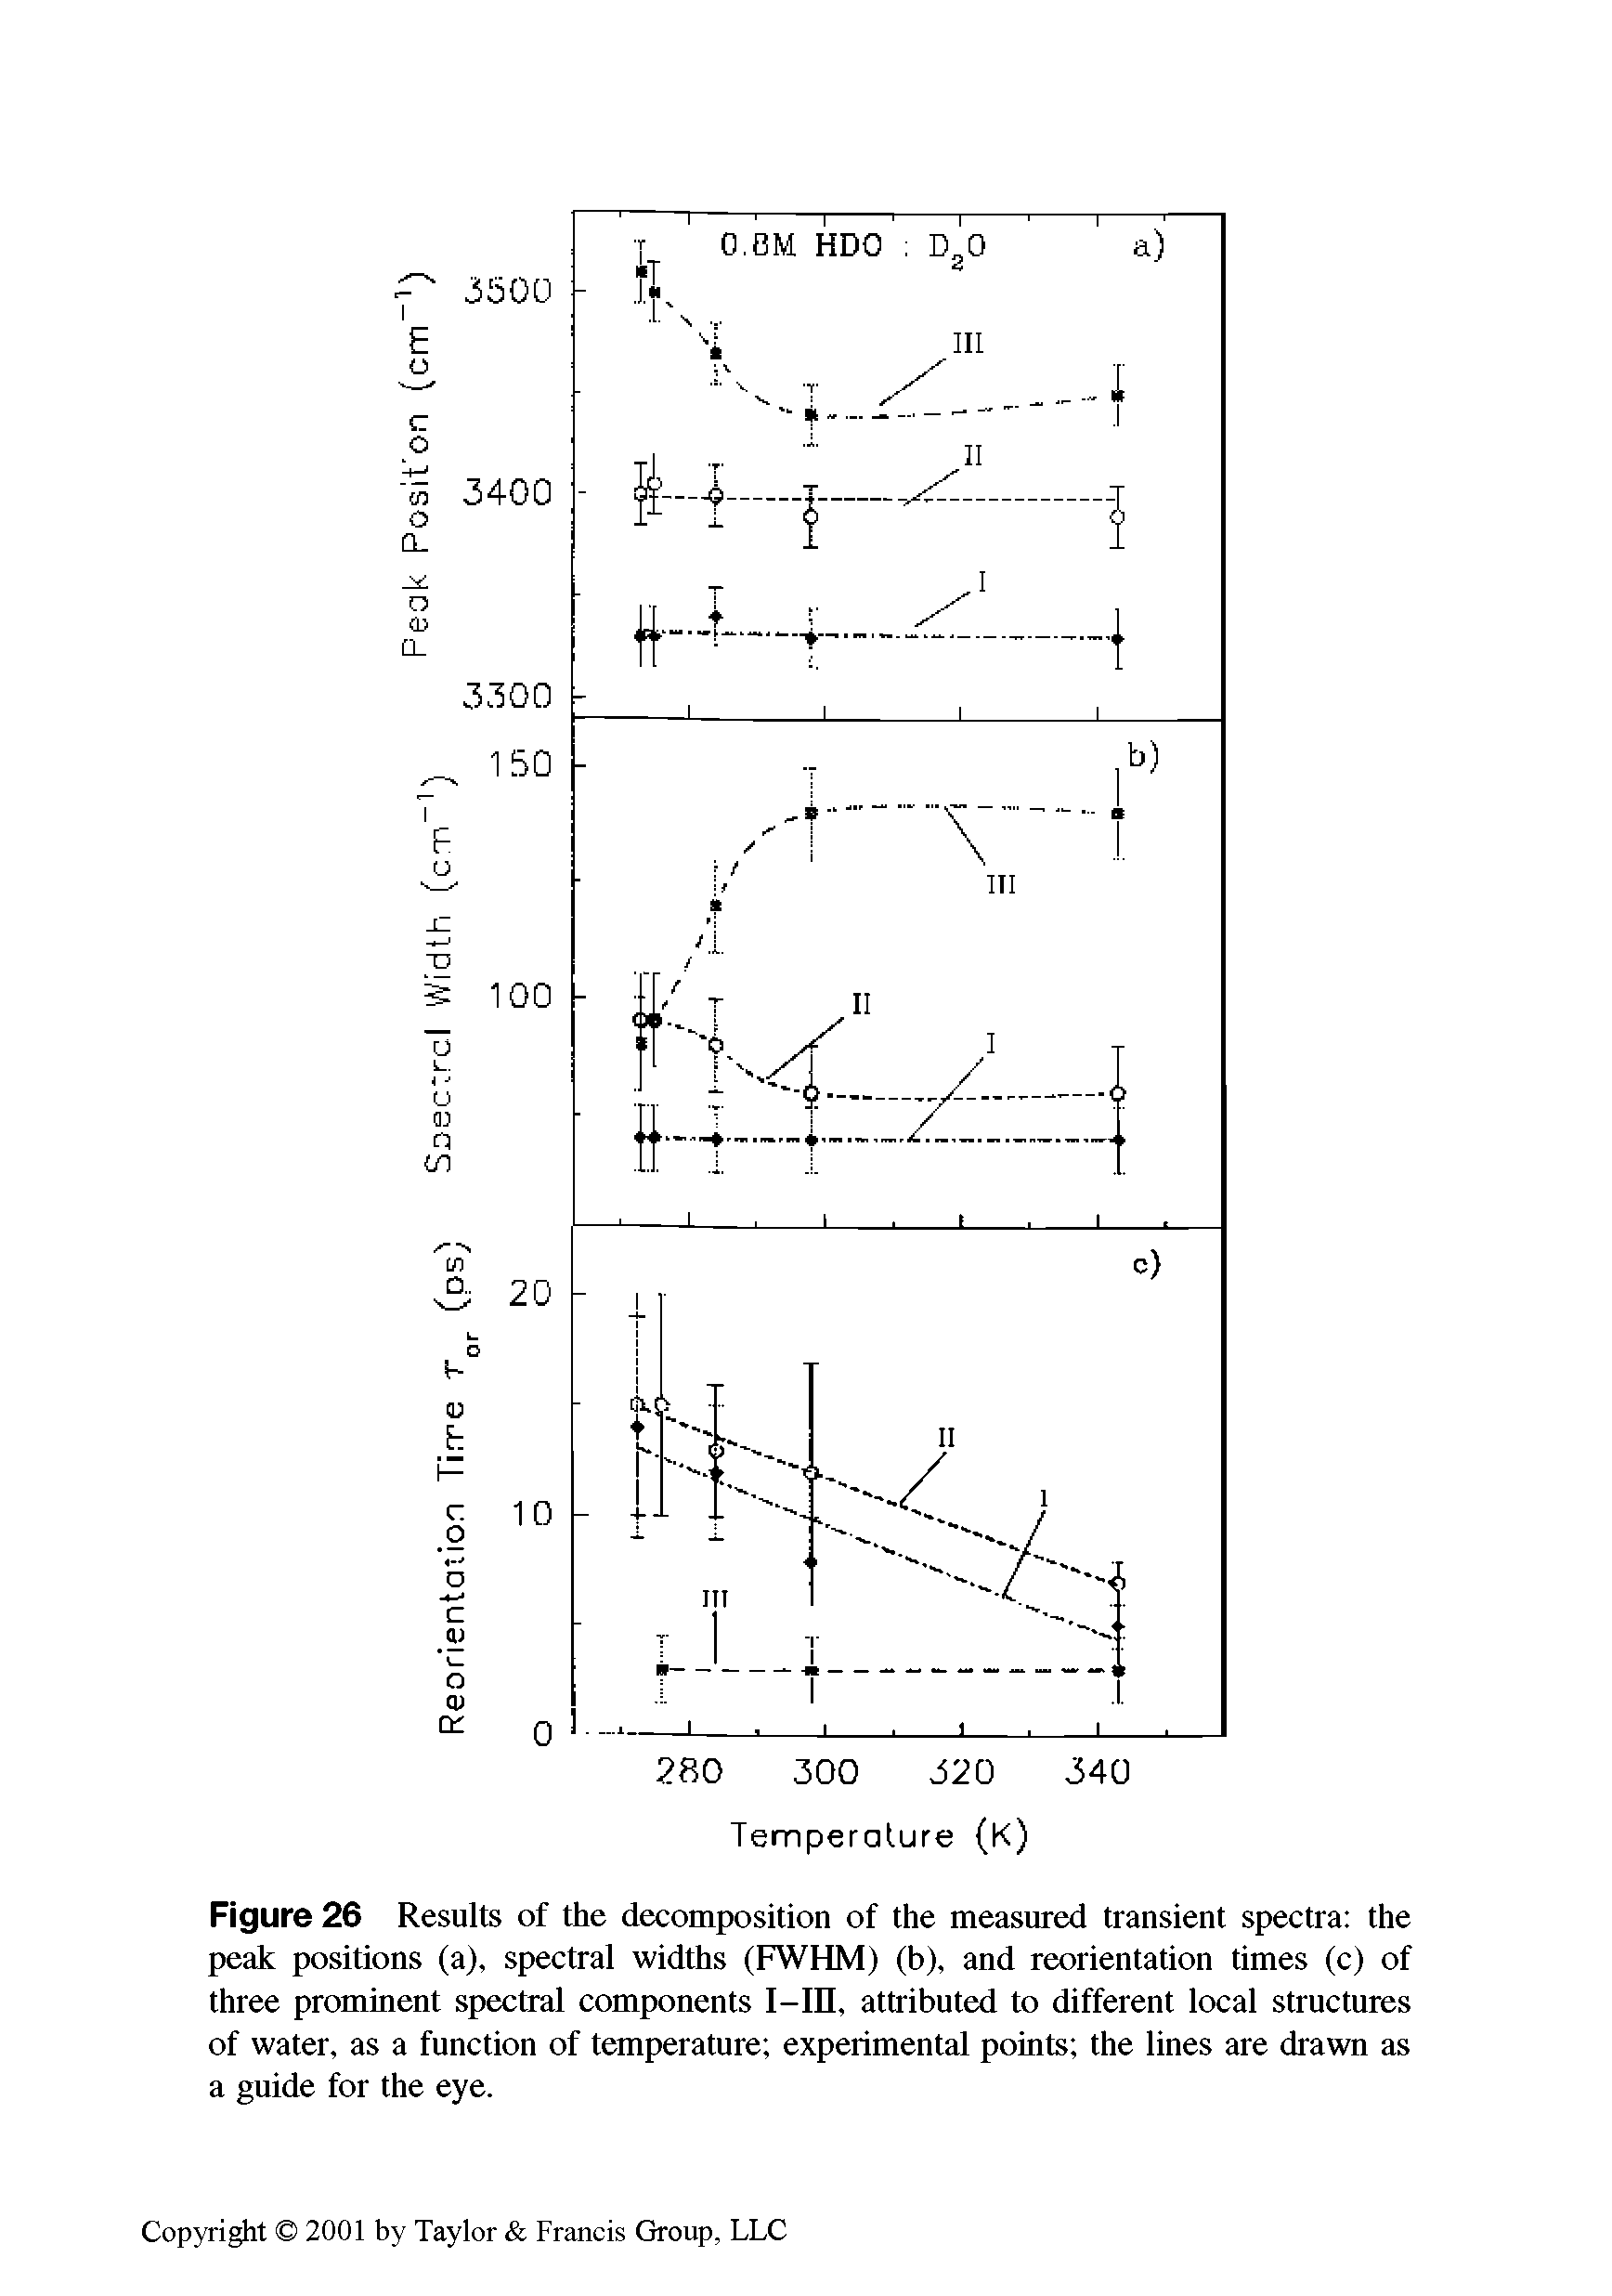 Figure 26 Results of the decomposition of the measured transient spectra the peak positions (a), spectral widths (FWHM) (b), and reorientation times (c) of three prominent spectral components I—in, attributed to different local structures of water, as a function of temperature experimental points the lines are drawn as a guide for the eye.